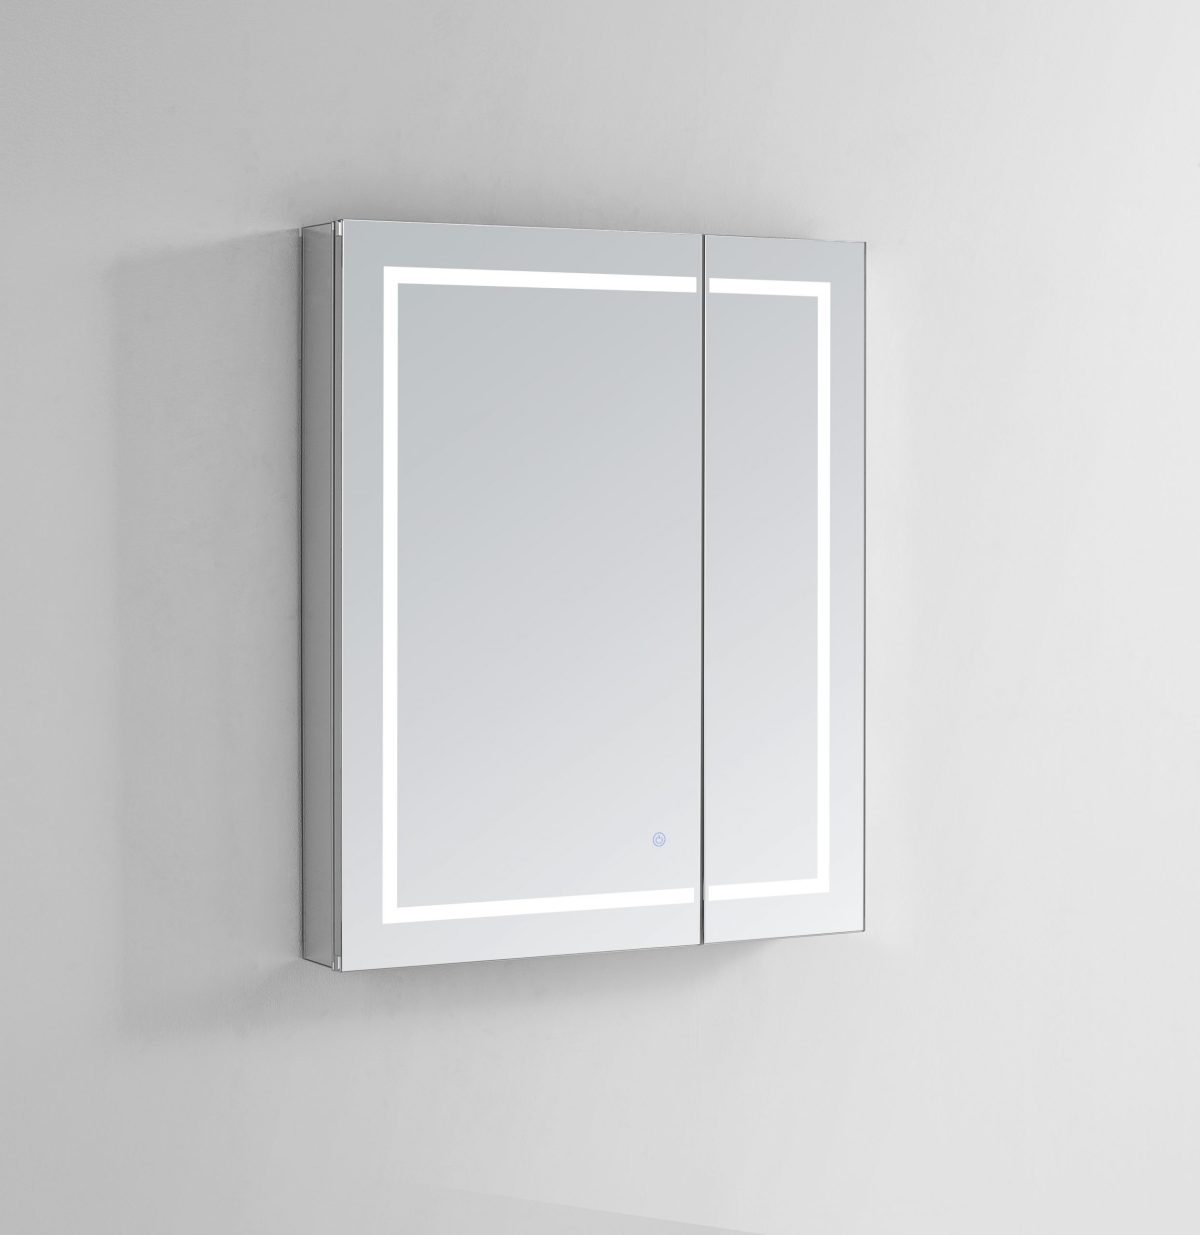 AQUADOM Royale Plus 30 inches x 36 inches LED Lighted Mirror Glass Medicine Cabinet for Bathroom